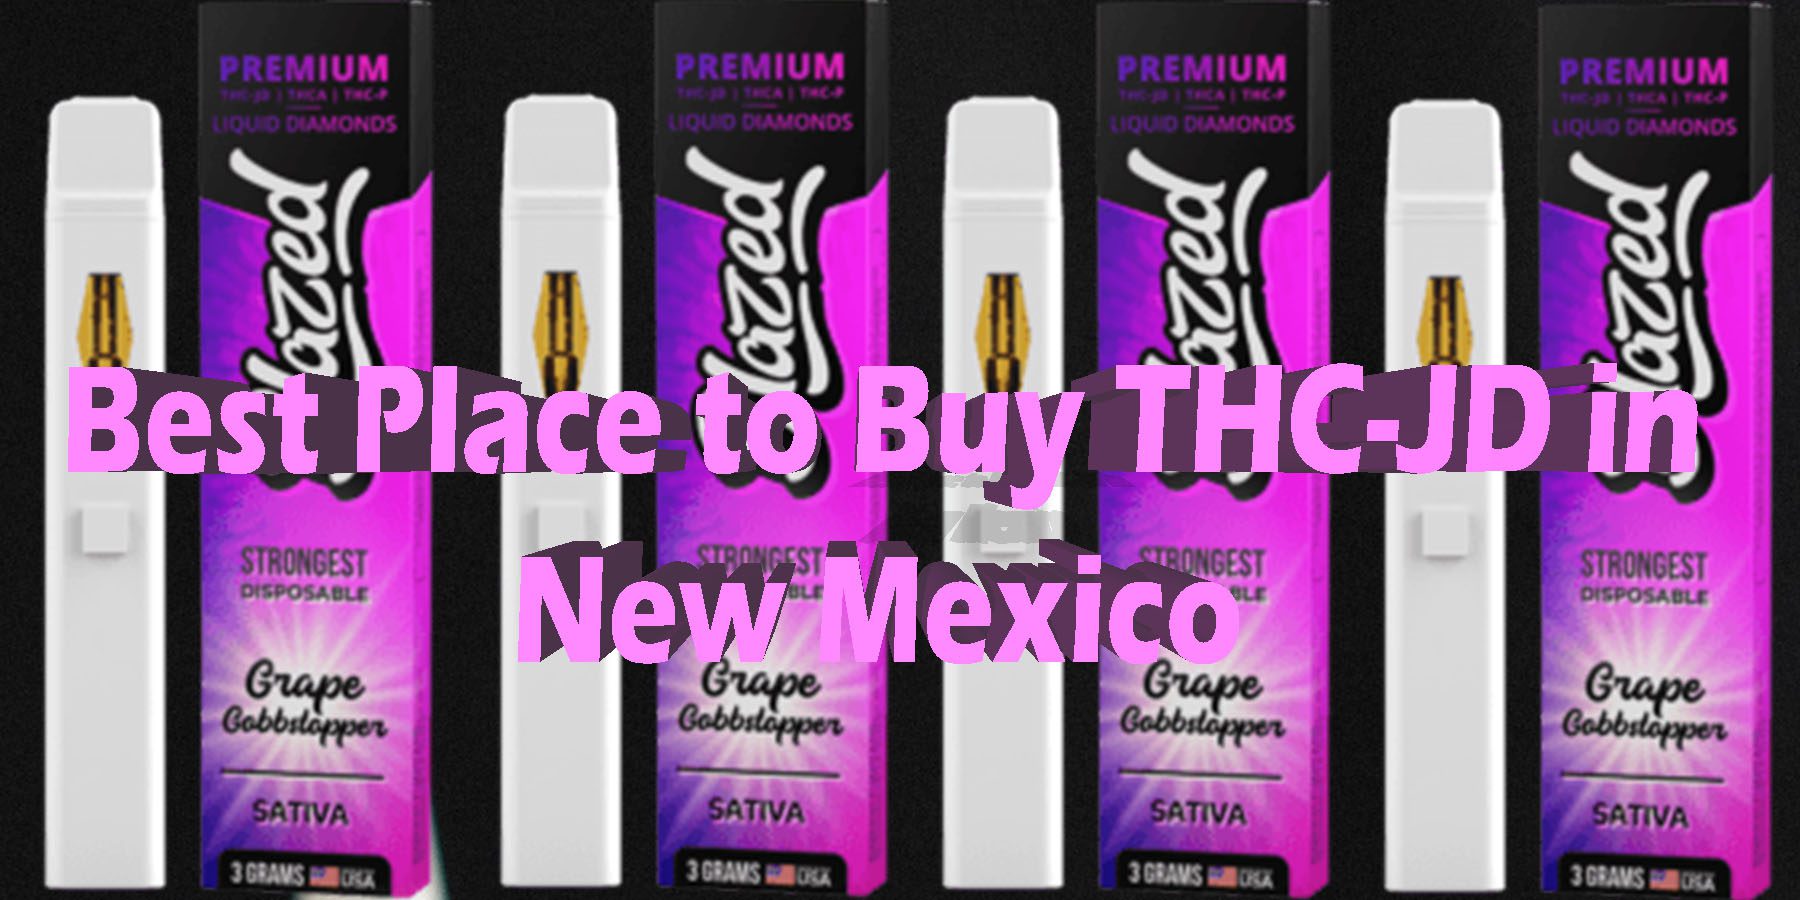 Best Place to Buy THC JD in New Mexico HowToGetNearMe BestPlace LowestPrice Coupon Discount For Smoking Best Brand D9 D8 THCA